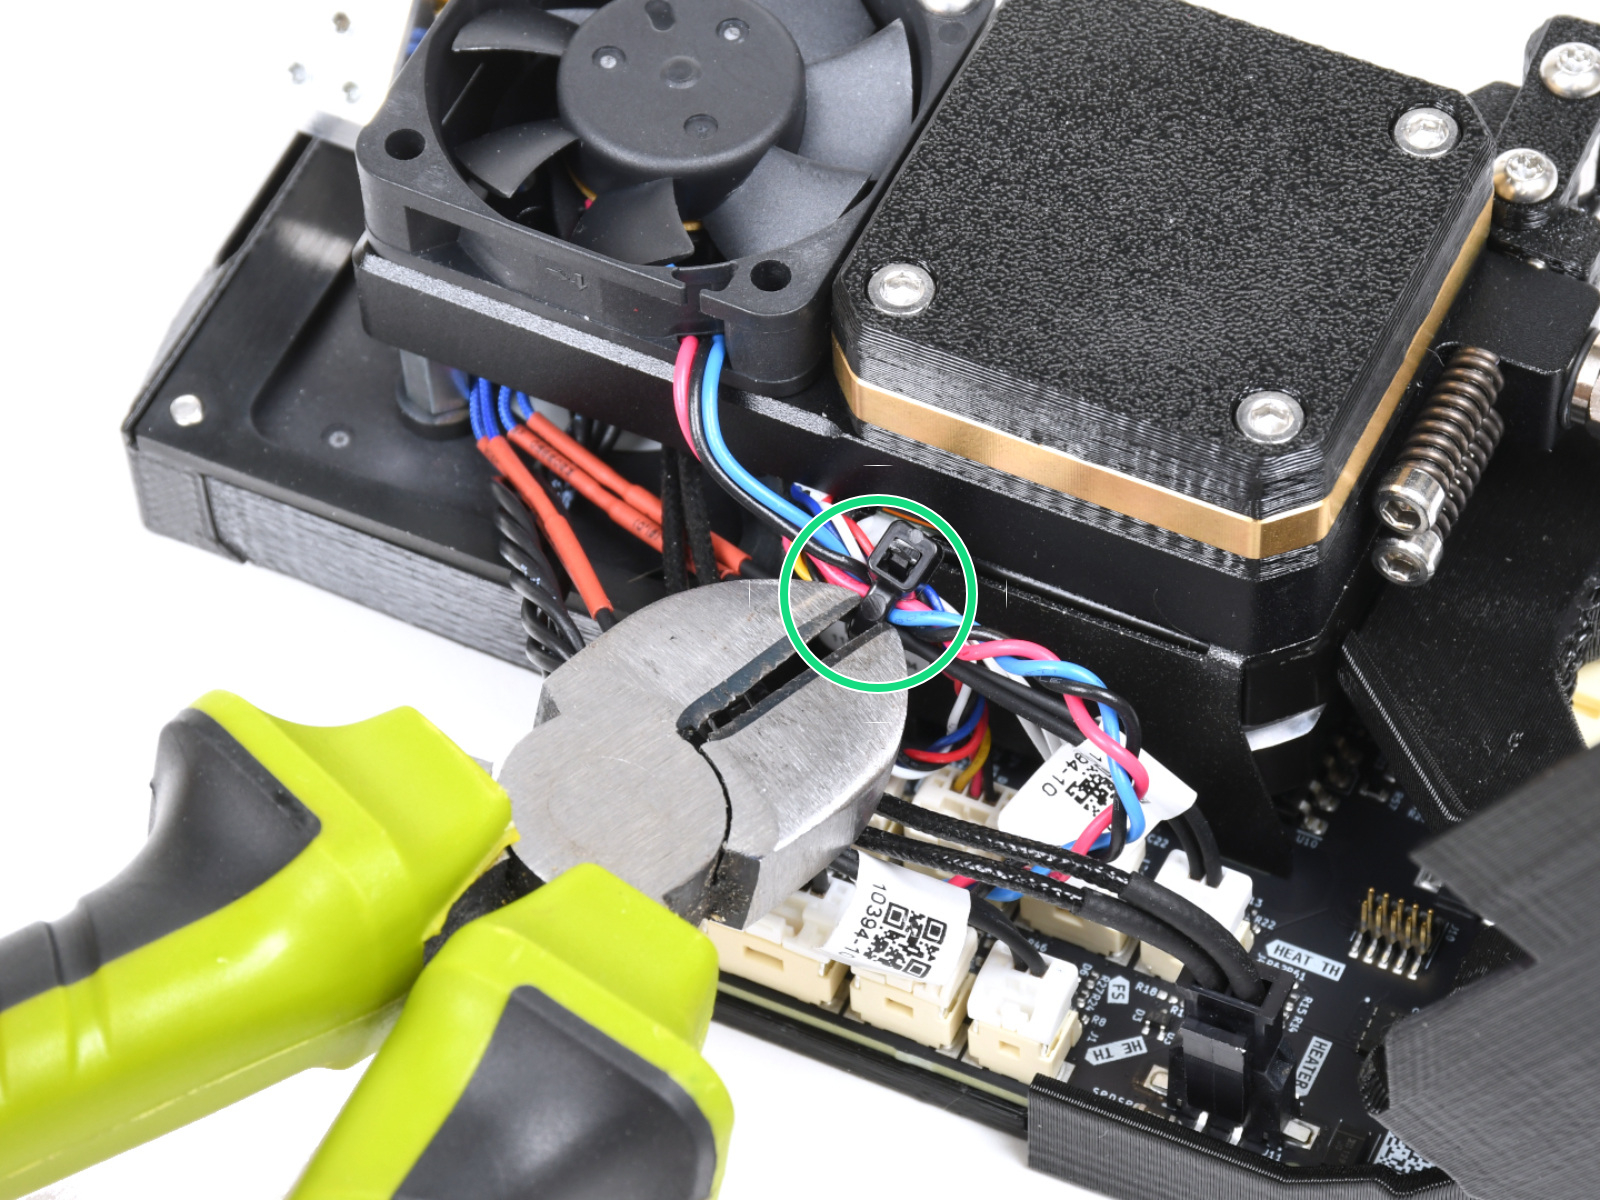 Unplugging the hotend fan